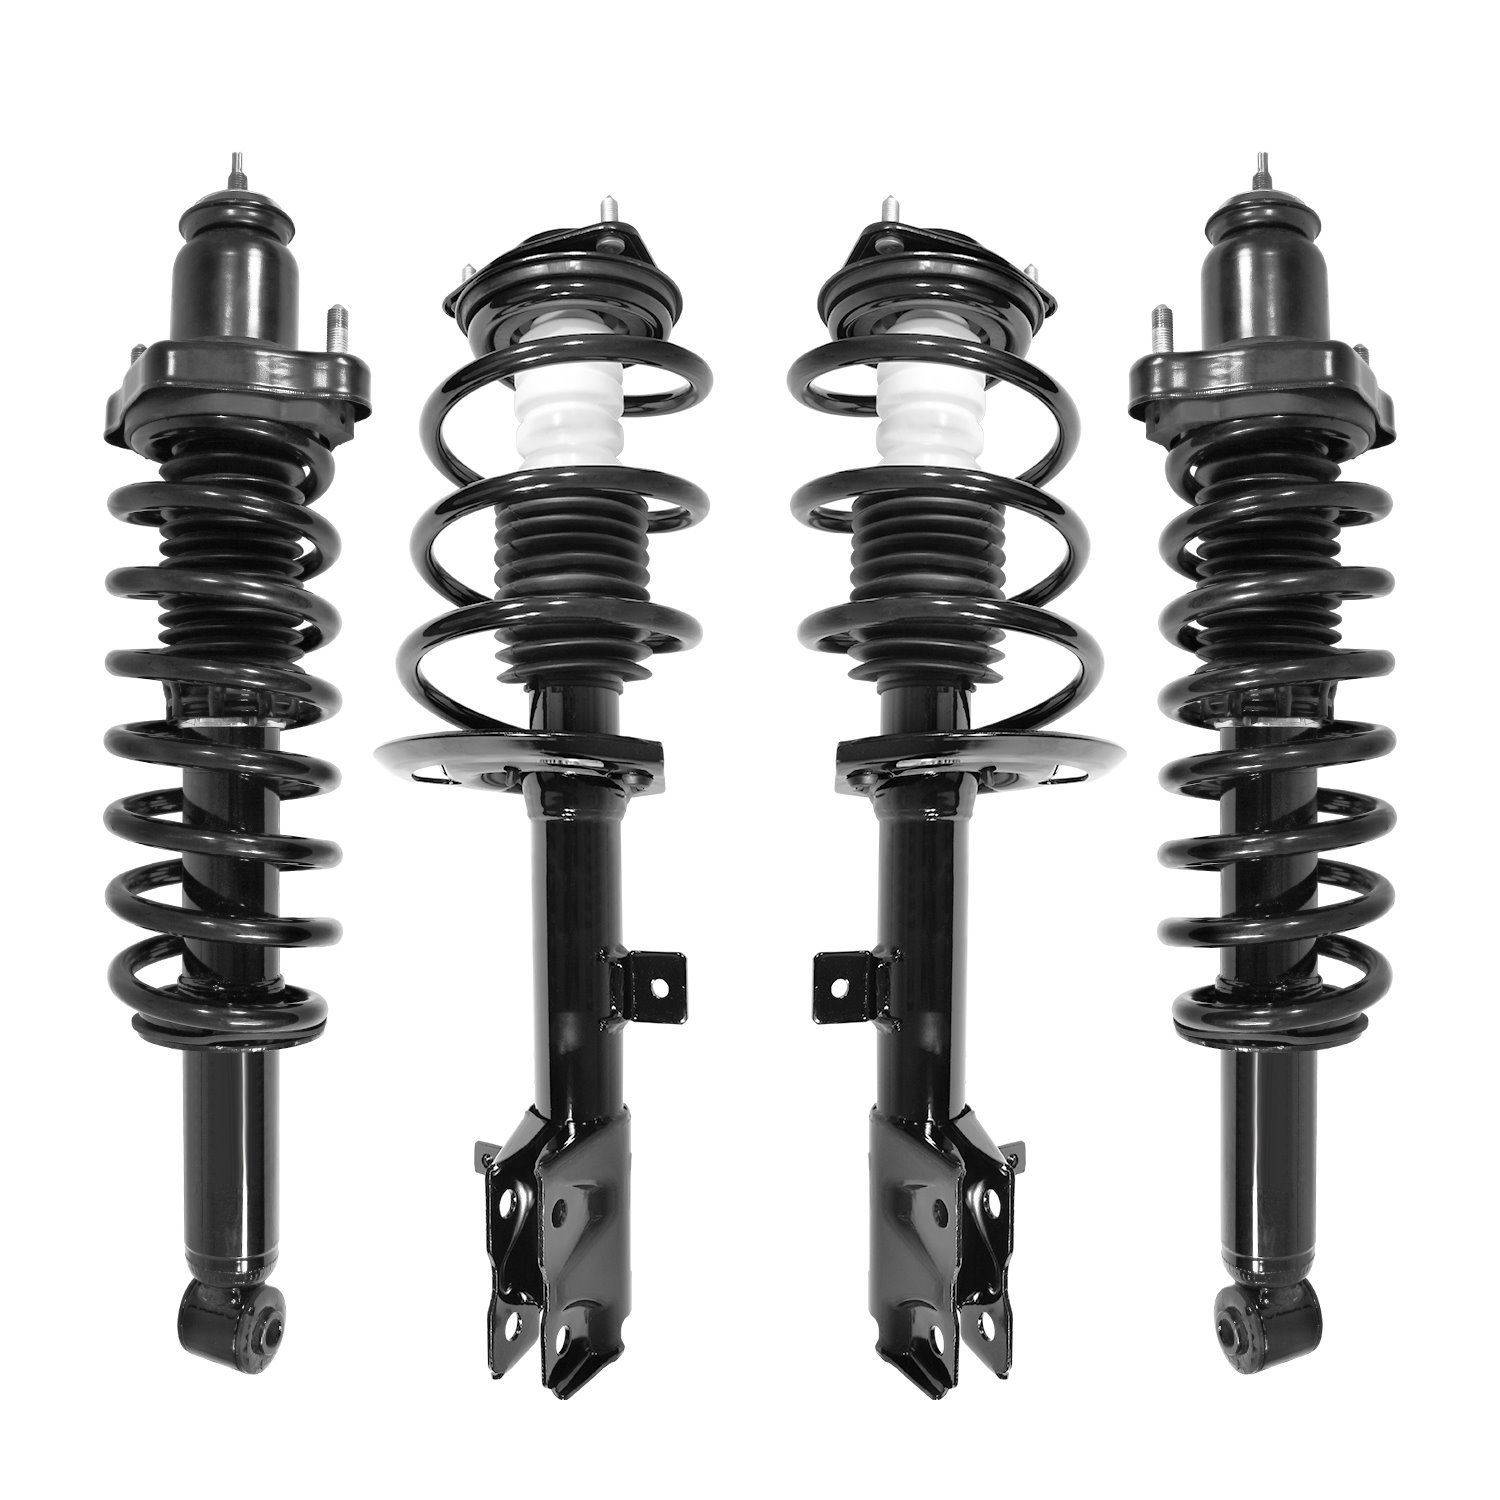 4-11581-15580-001 Front & Rear Suspension Strut & Coil Spring Assembly Kit Fits Select Dodge Caliber, Jeep Compass, Jeep Patriot